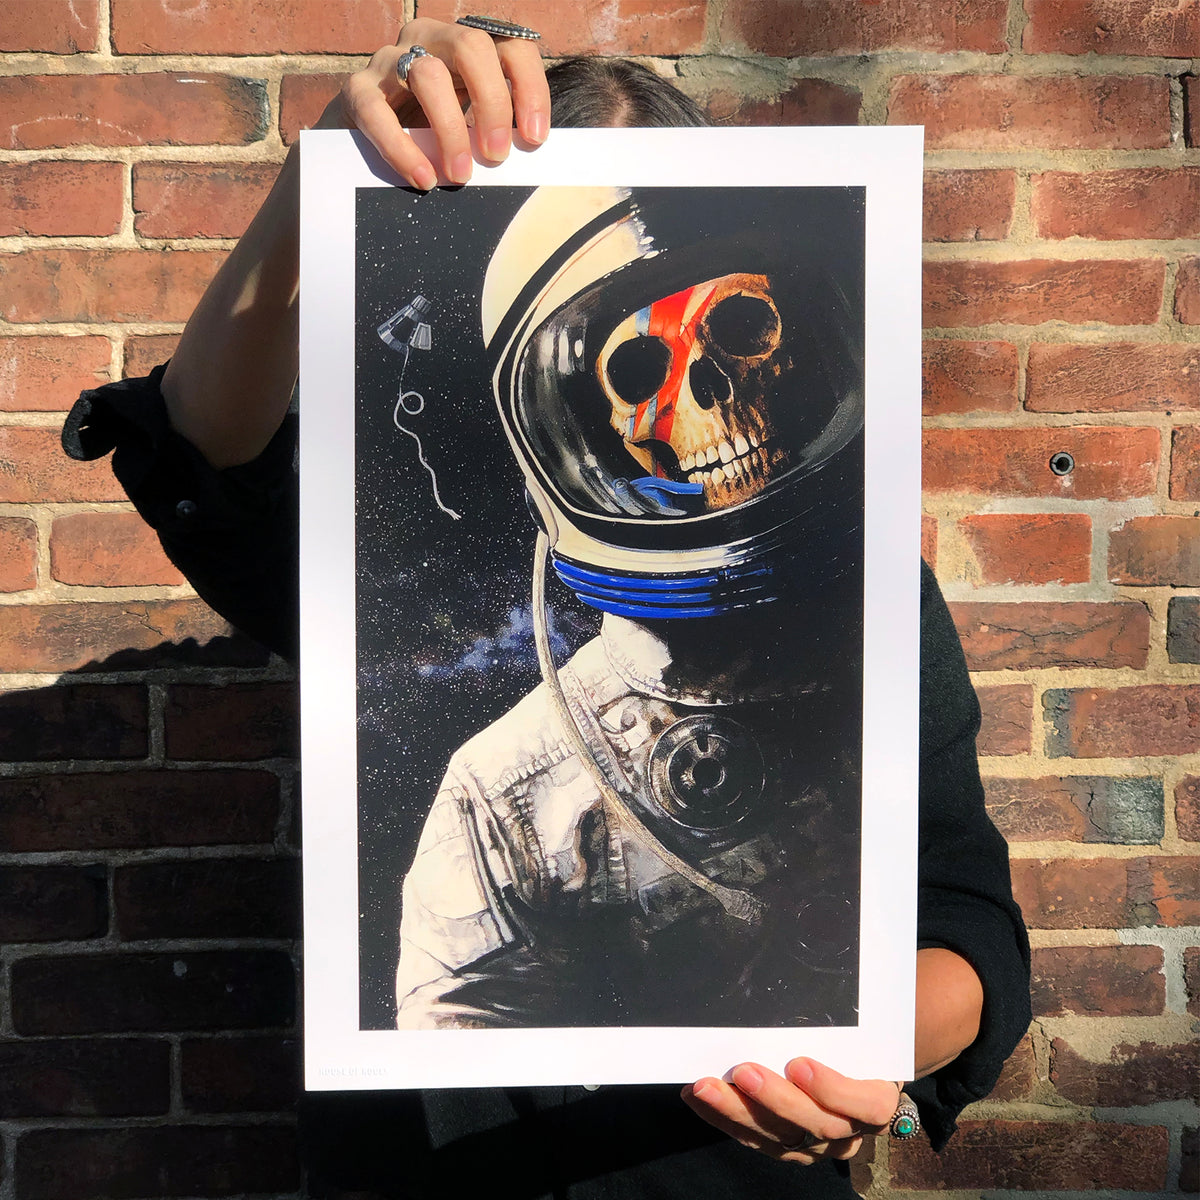 Michele Melcher &quot;Space Oddity&quot; - Hand-Embellished Edition of 5 - 11 x 17&quot;